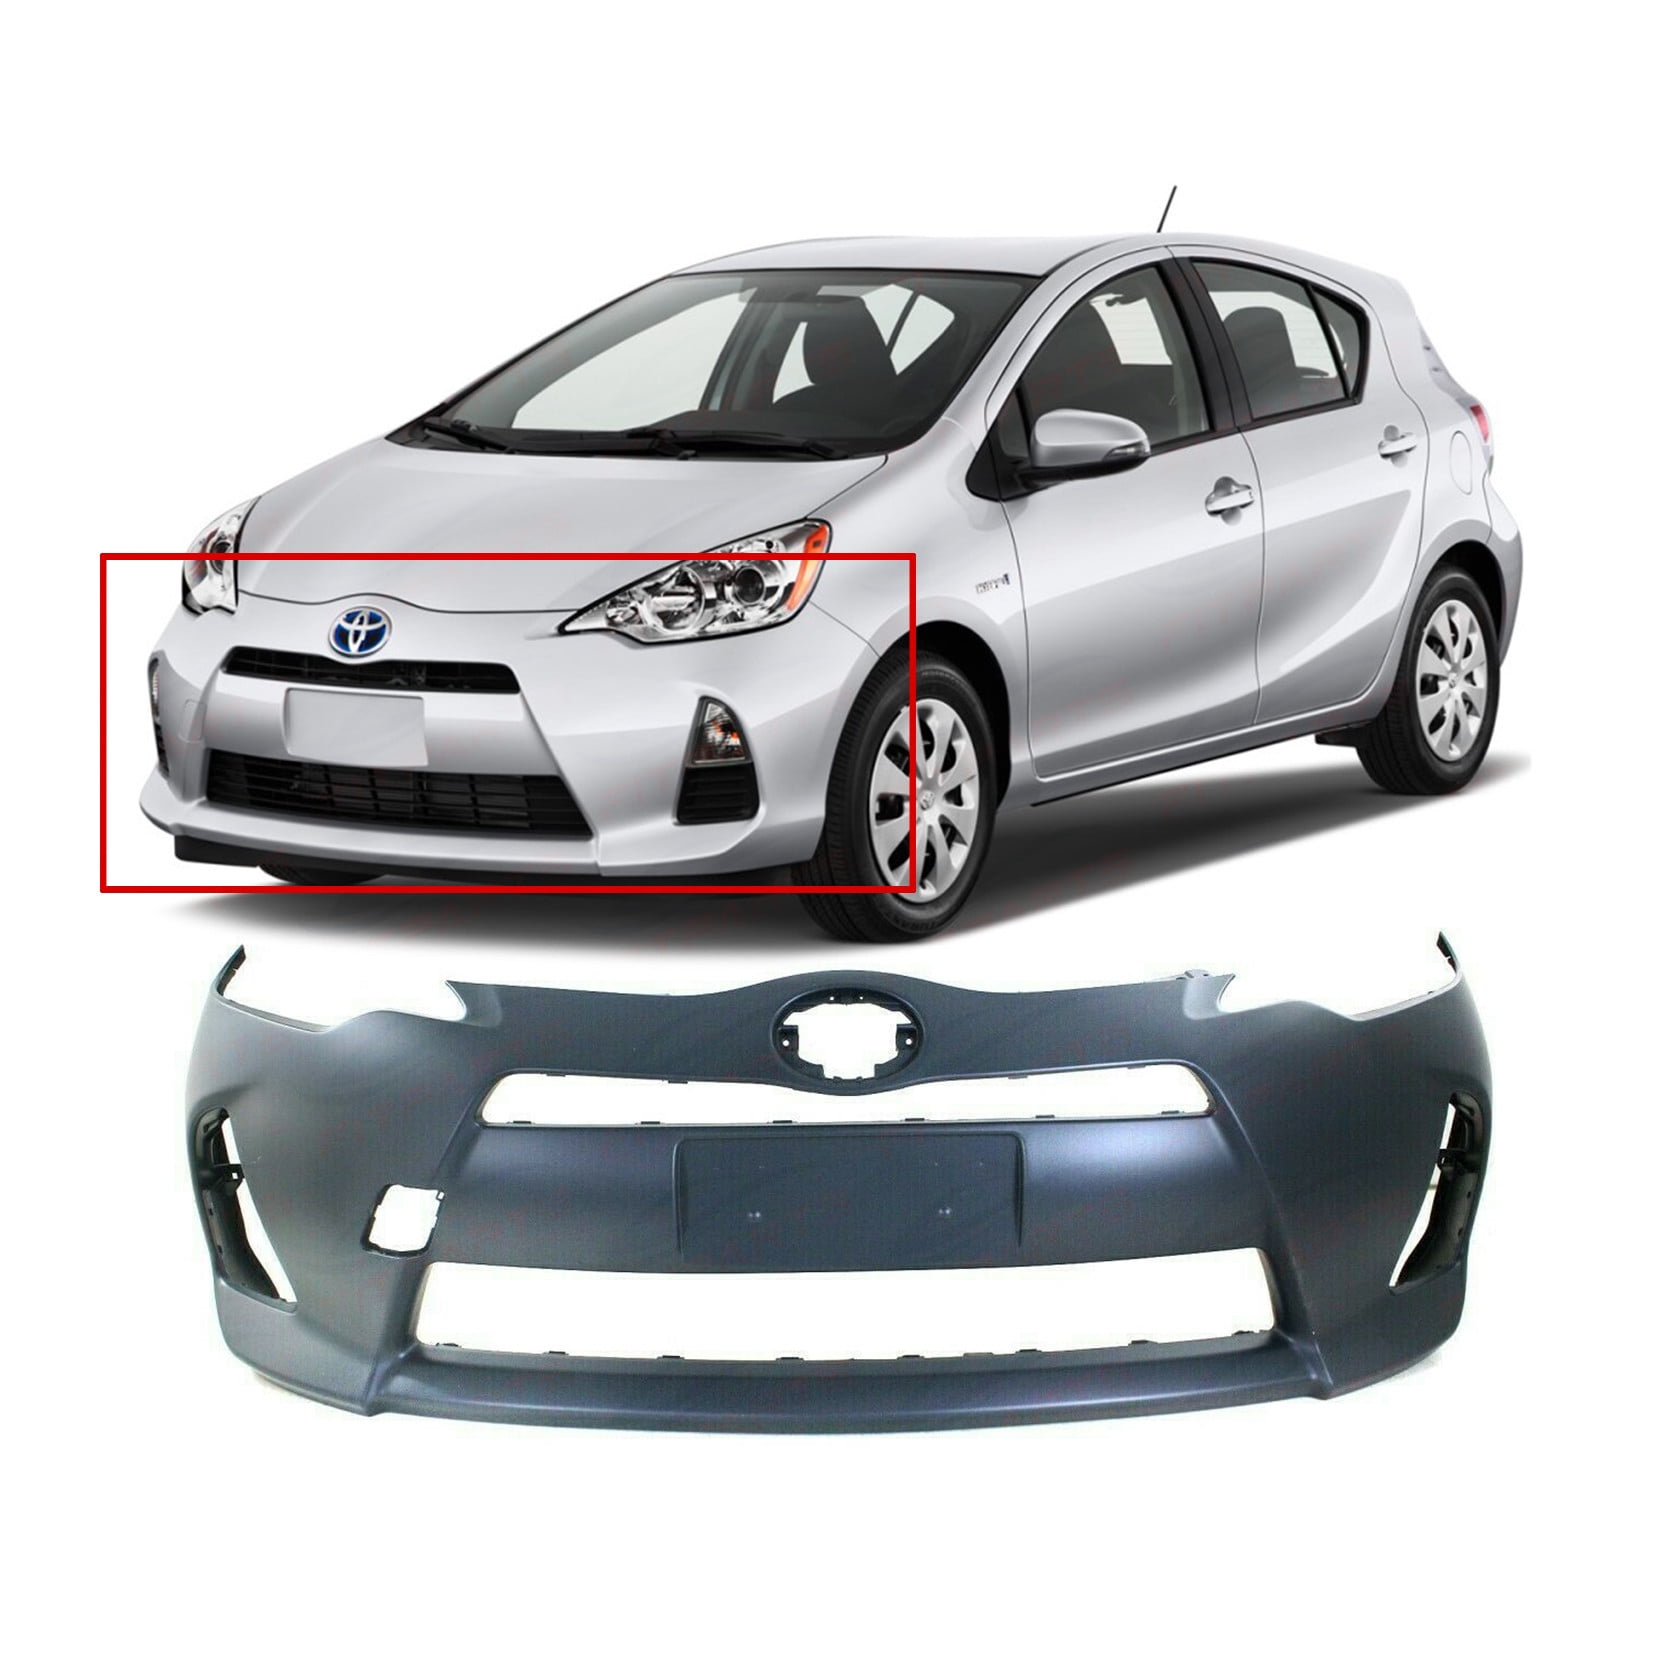 UV Resistant Vehicle Accessories WATERPROOF Fabric Indoor/Outdoor Protection XtremeCoverPro Car Covers Ready fit for TOYOTA PRIUS 2000~2017 